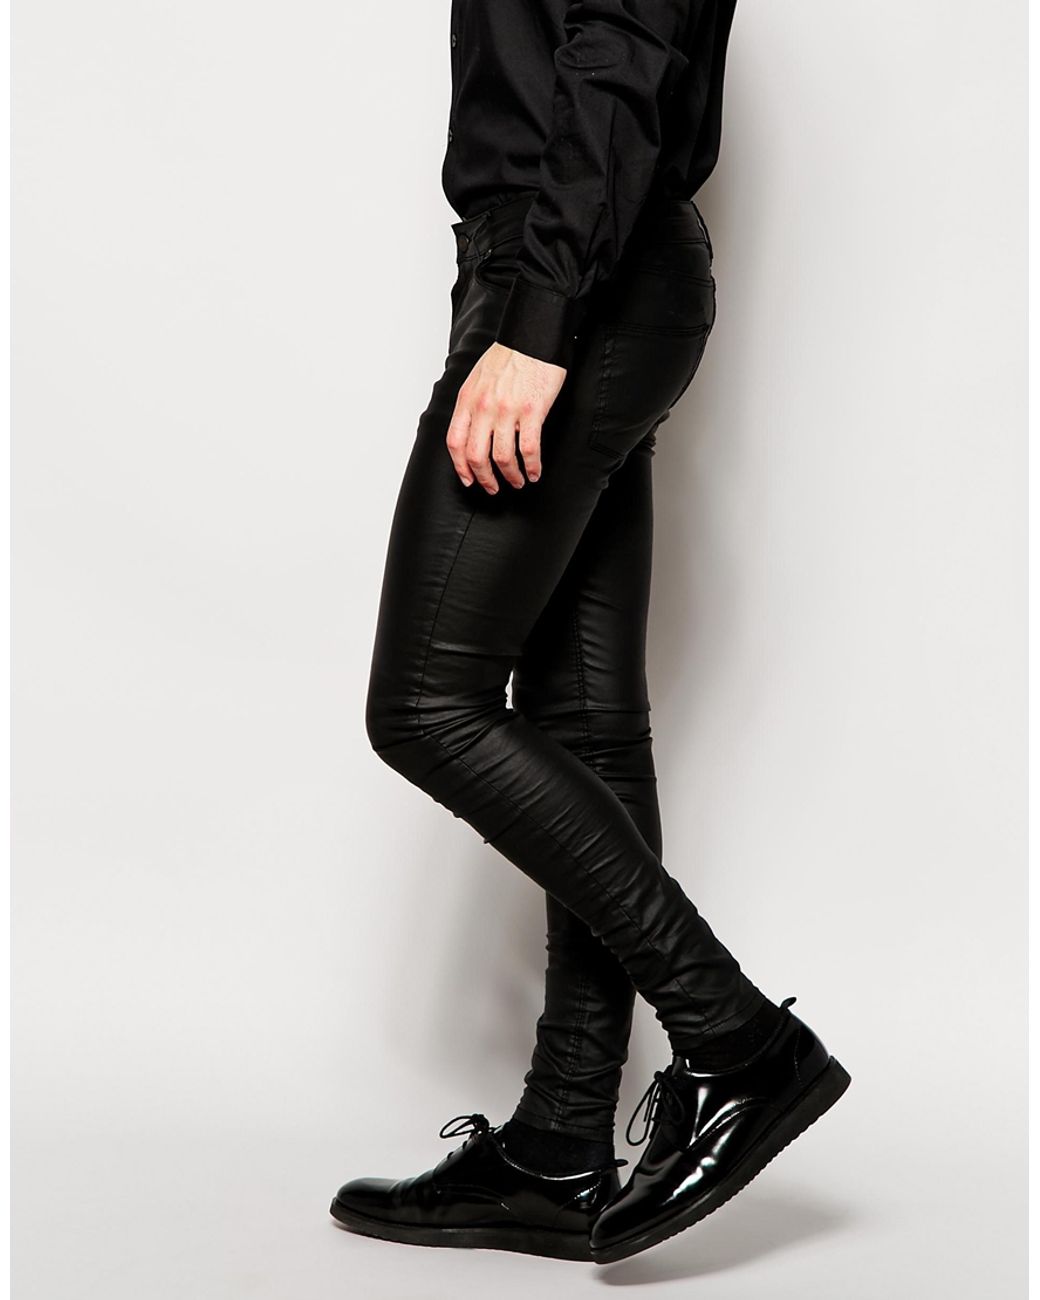 ASOS Extreme Super Skinny Jeans In Leather Look in Black for Men | Lyst